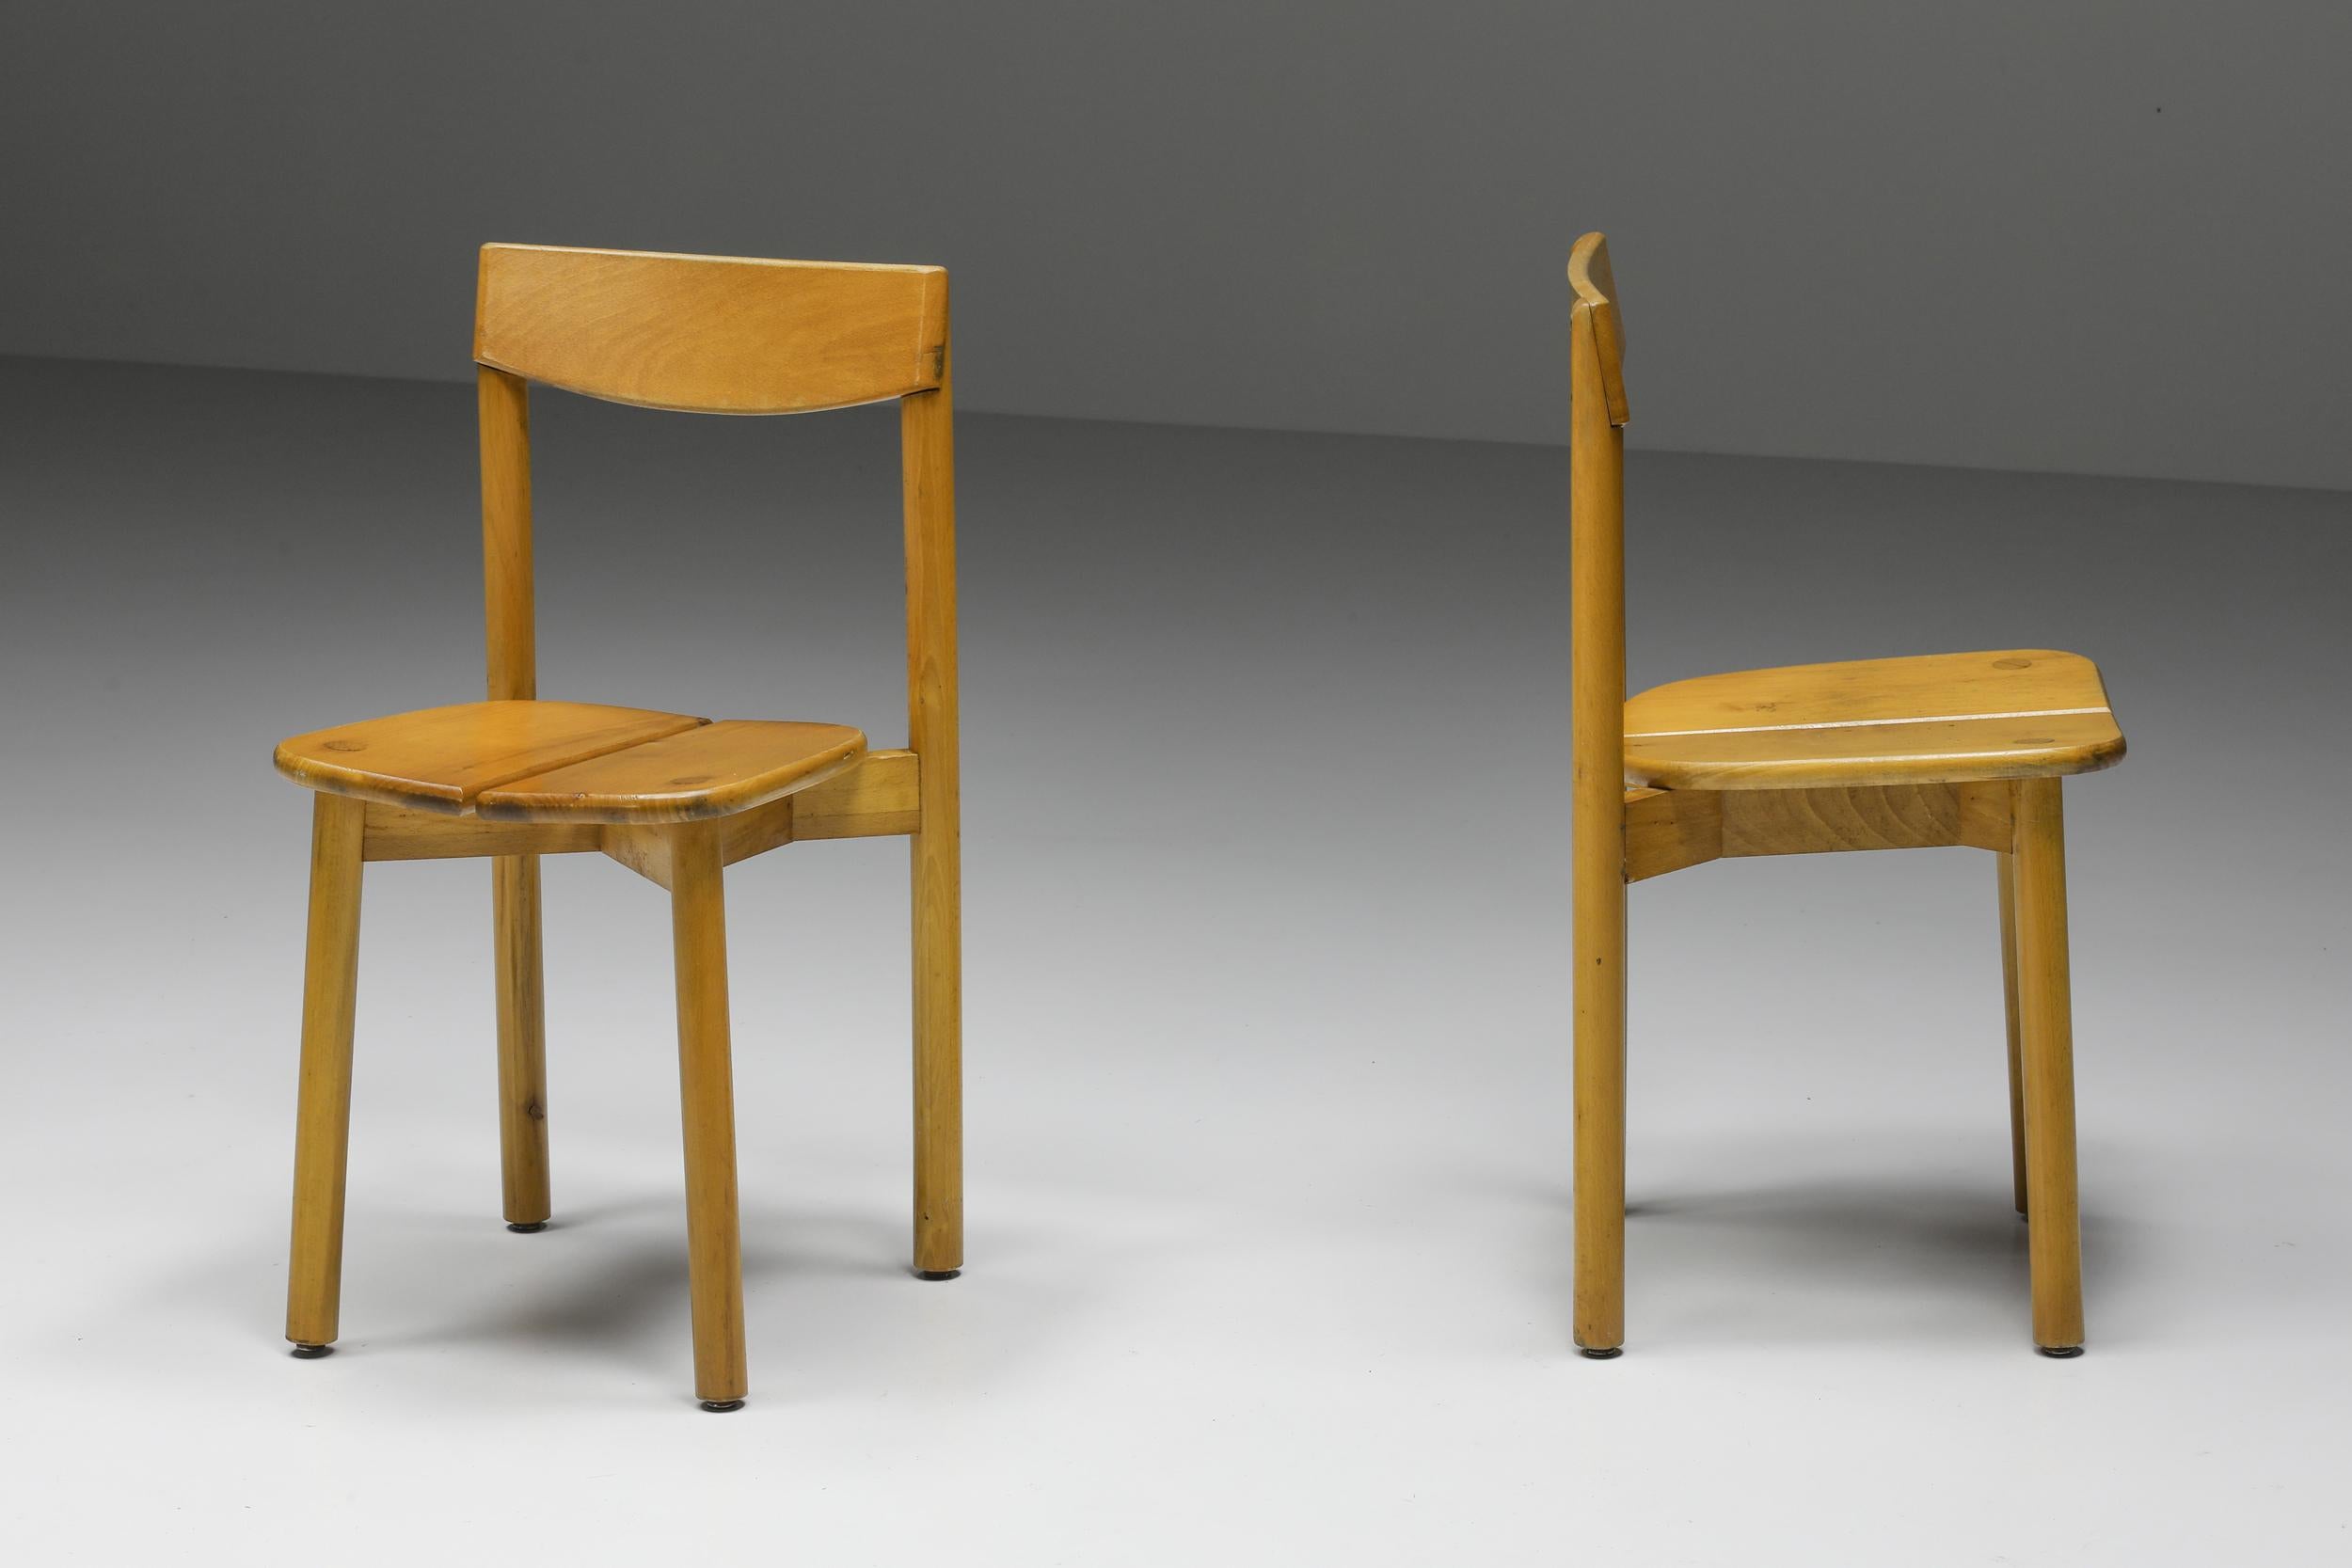 Stained Pierre Gautier-Delaye Dining Chairs, Mid-Century Modern, Beech, French Organic